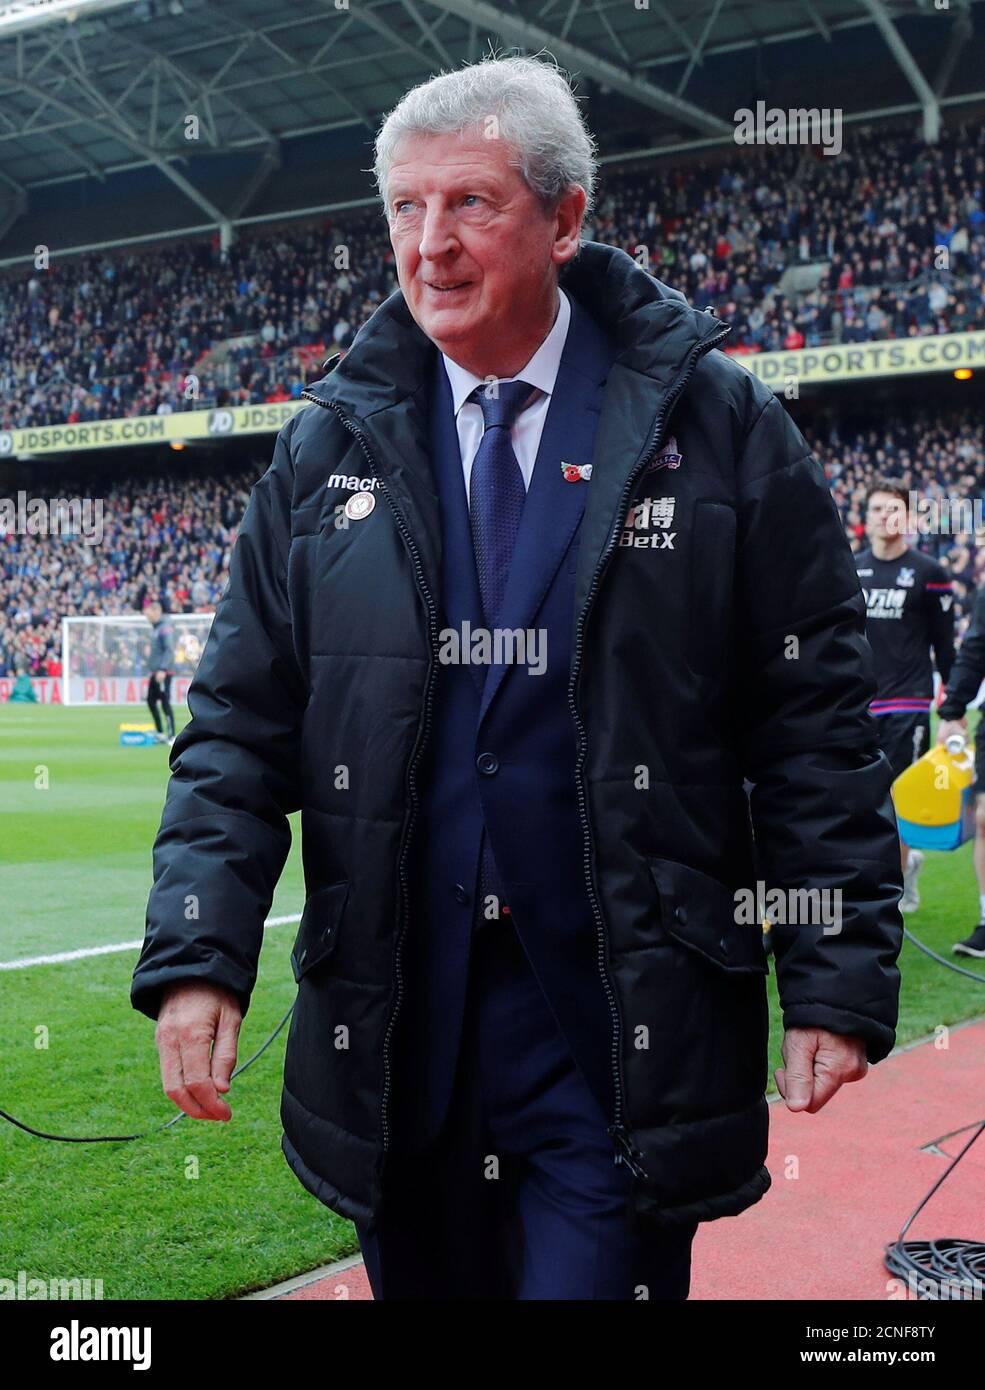 Soccer Football - Premier League - Crystal Palace vs West Ham United - Selhurst Park, London, Britain - October 28, 2017   Crystal Palace manager Roy Hodgson before the match   REUTERS/Eddie Keogh    EDITORIAL USE ONLY. No use with unauthorized audio, video, data, fixture lists, club/league logos or 'live' services. Online in-match use limited to 75 images, no video emulation. No use in betting, games or single club/league/player publications. Please contact your account representative for further details.? Stock Photo